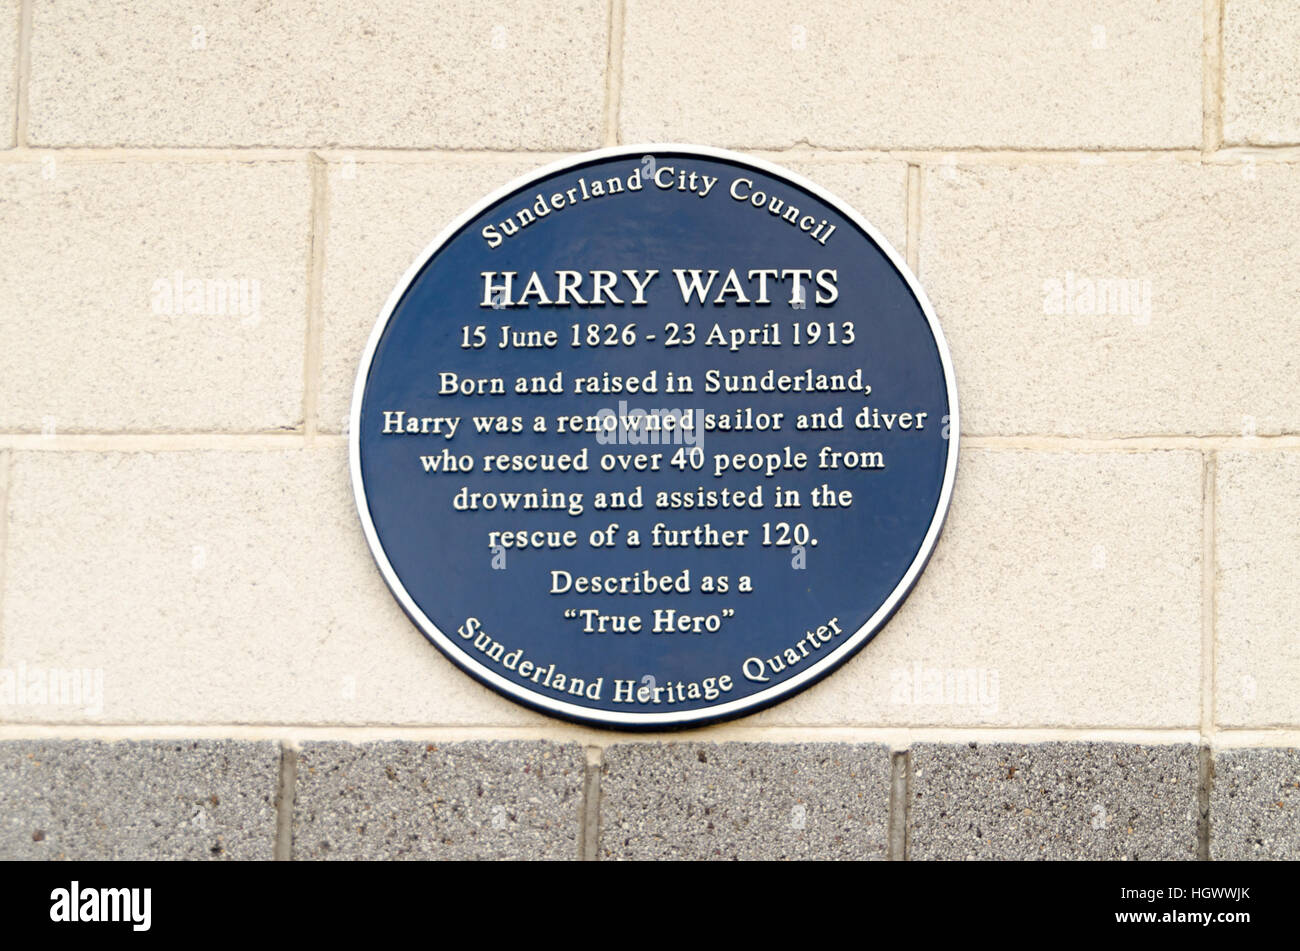 Blue Heritage Plaque for 'Harry Watts', renowned Sailor & Diver, located at the RNLI headquarters, Sunderland Marina, Sunderland Stock Photo